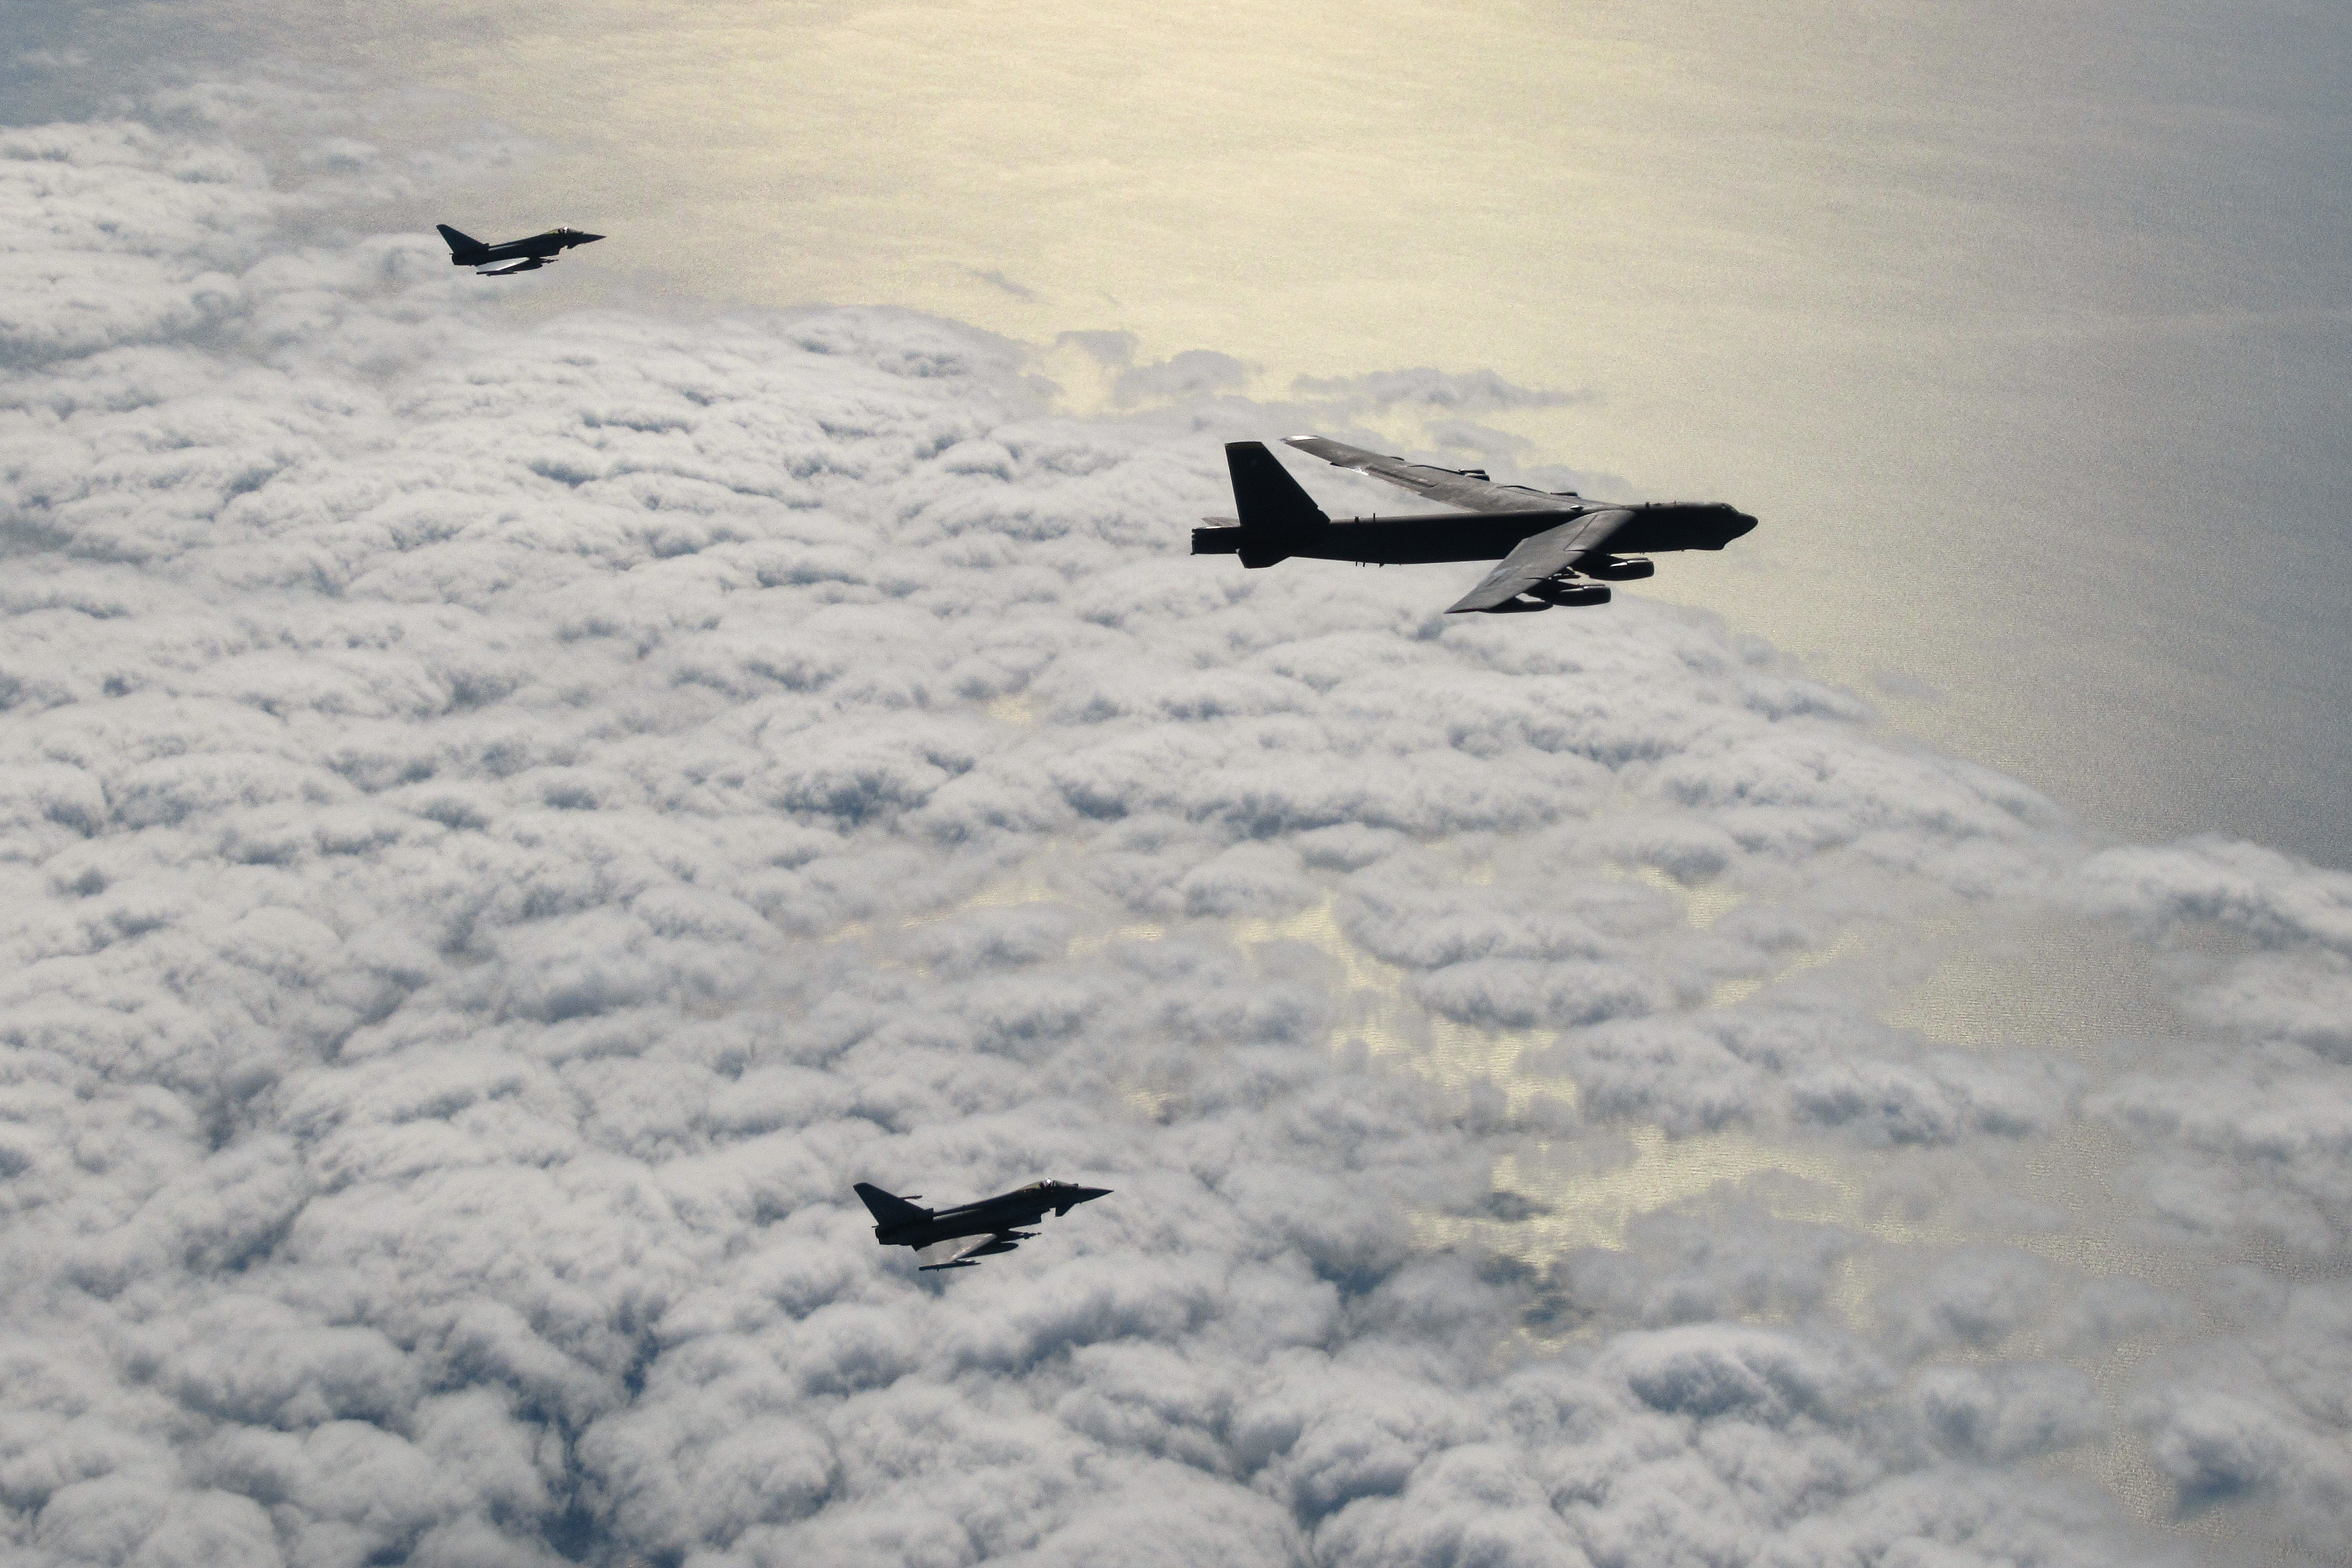 United States Air Force B-52 bomber and two RAF Typhoons above the clouds.